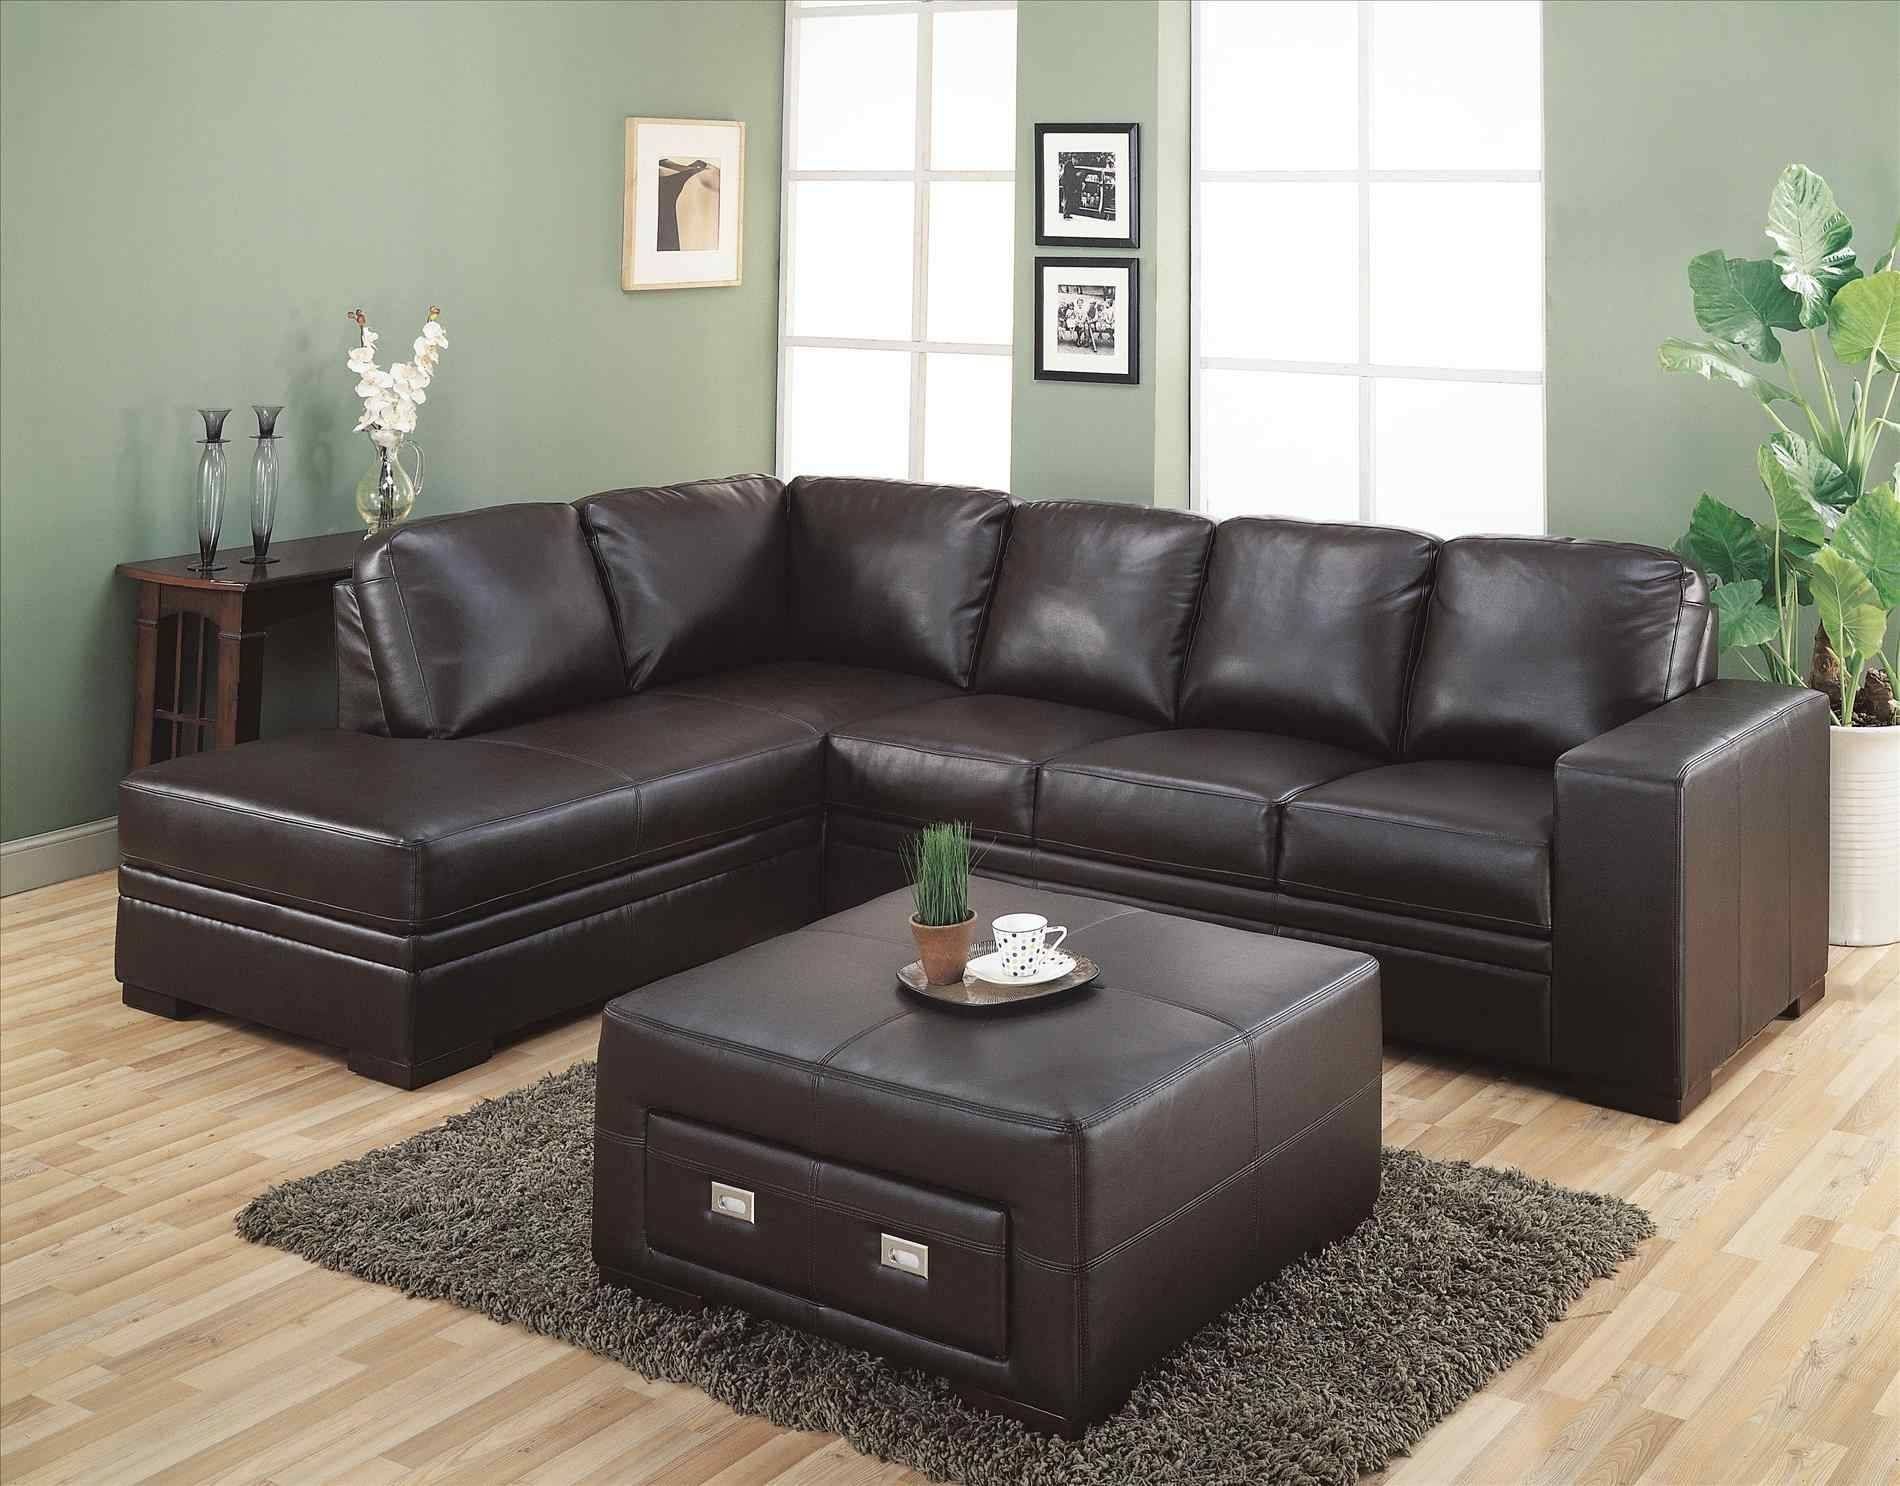 Chocolate Colored Sectional Sofa | Chair And Sofa Within Chocolate Brown Sectional Sofa (Photo 27 of 30)